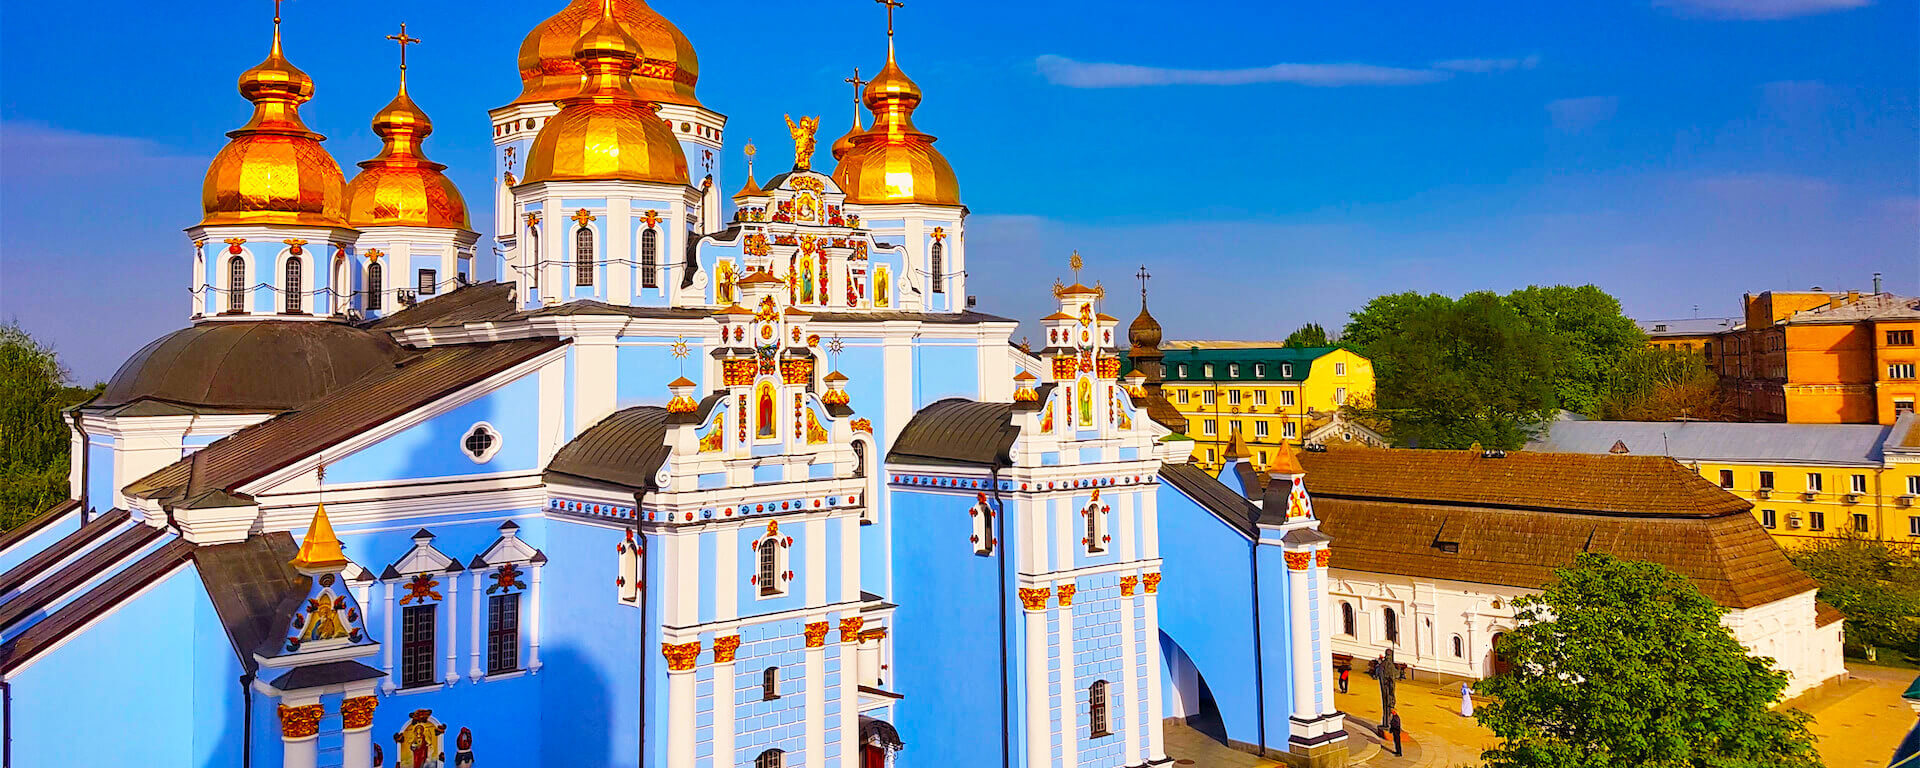 Kiev - The land of Monasteries and Cathedrals